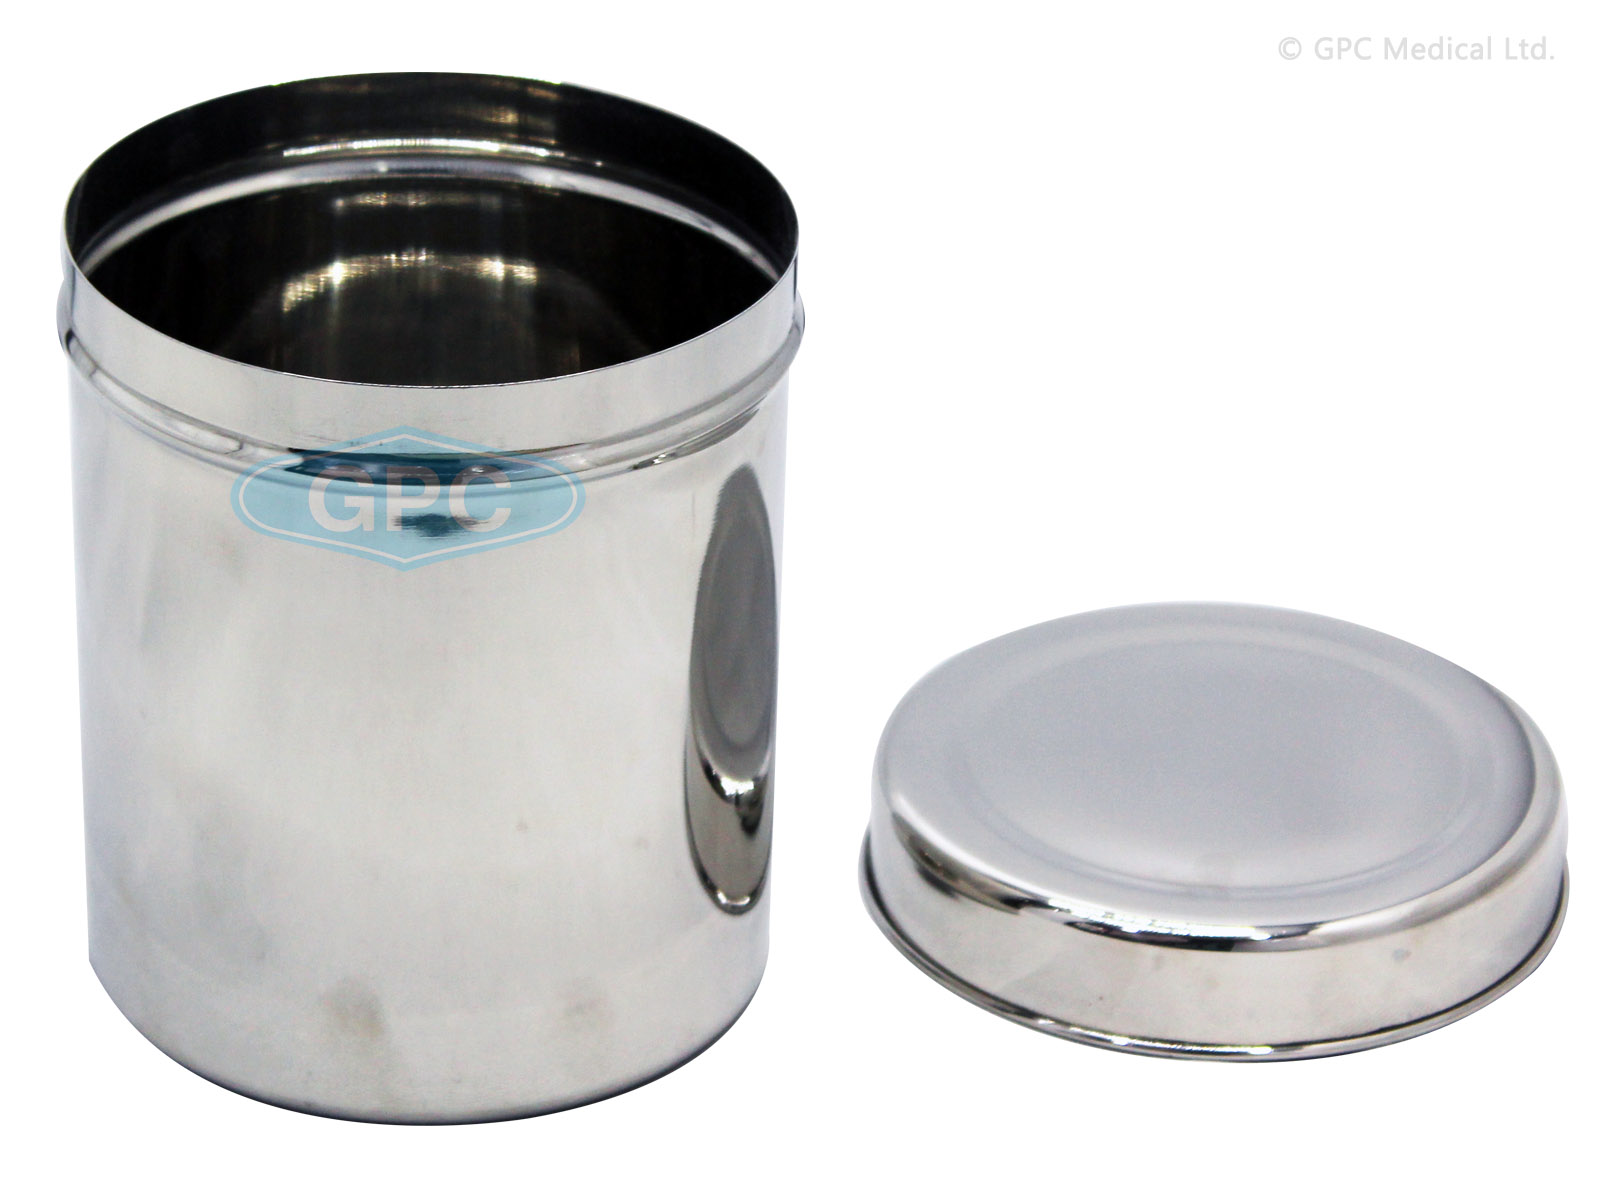 Dressing Jars with cover, Stainless Steel Manufacturer & Supplier